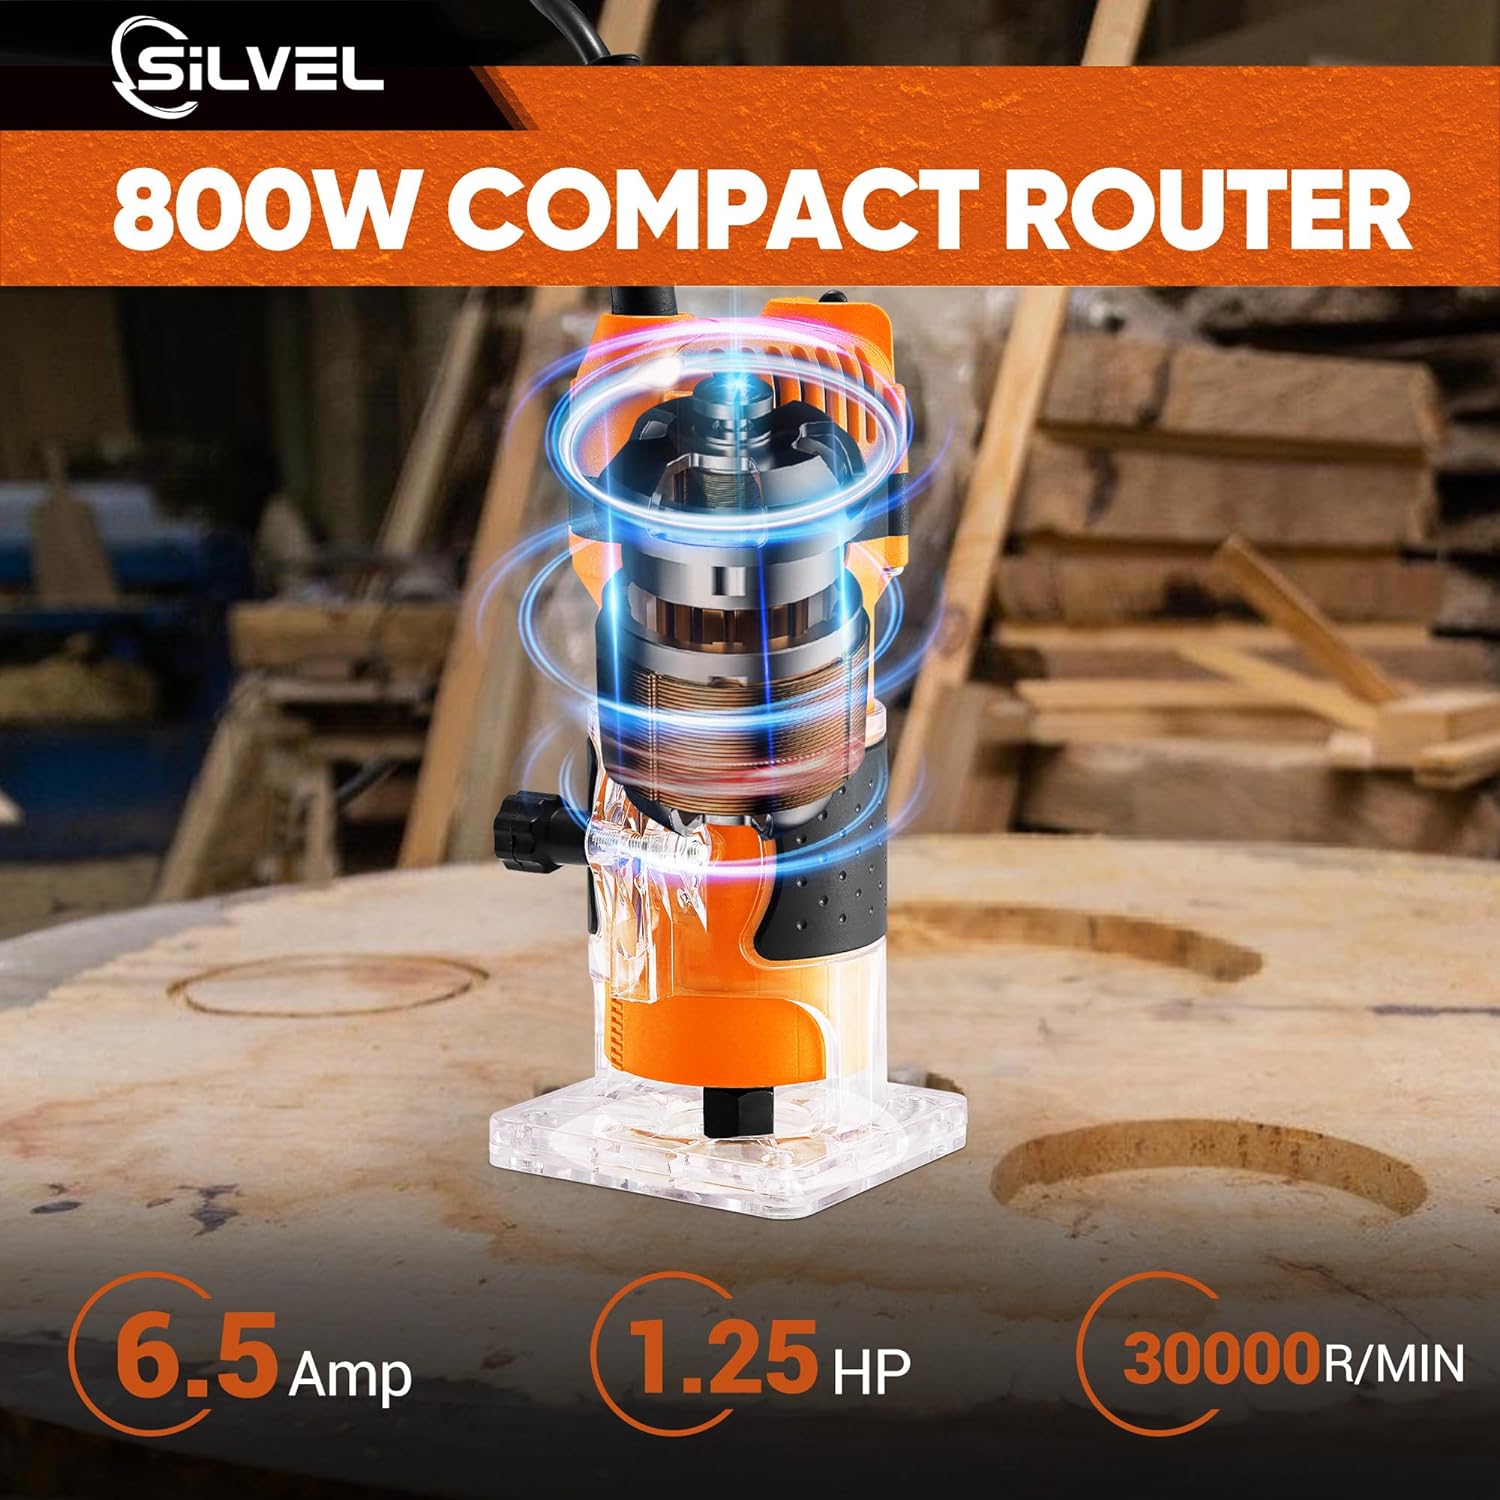 SILVEL Wood Router Review